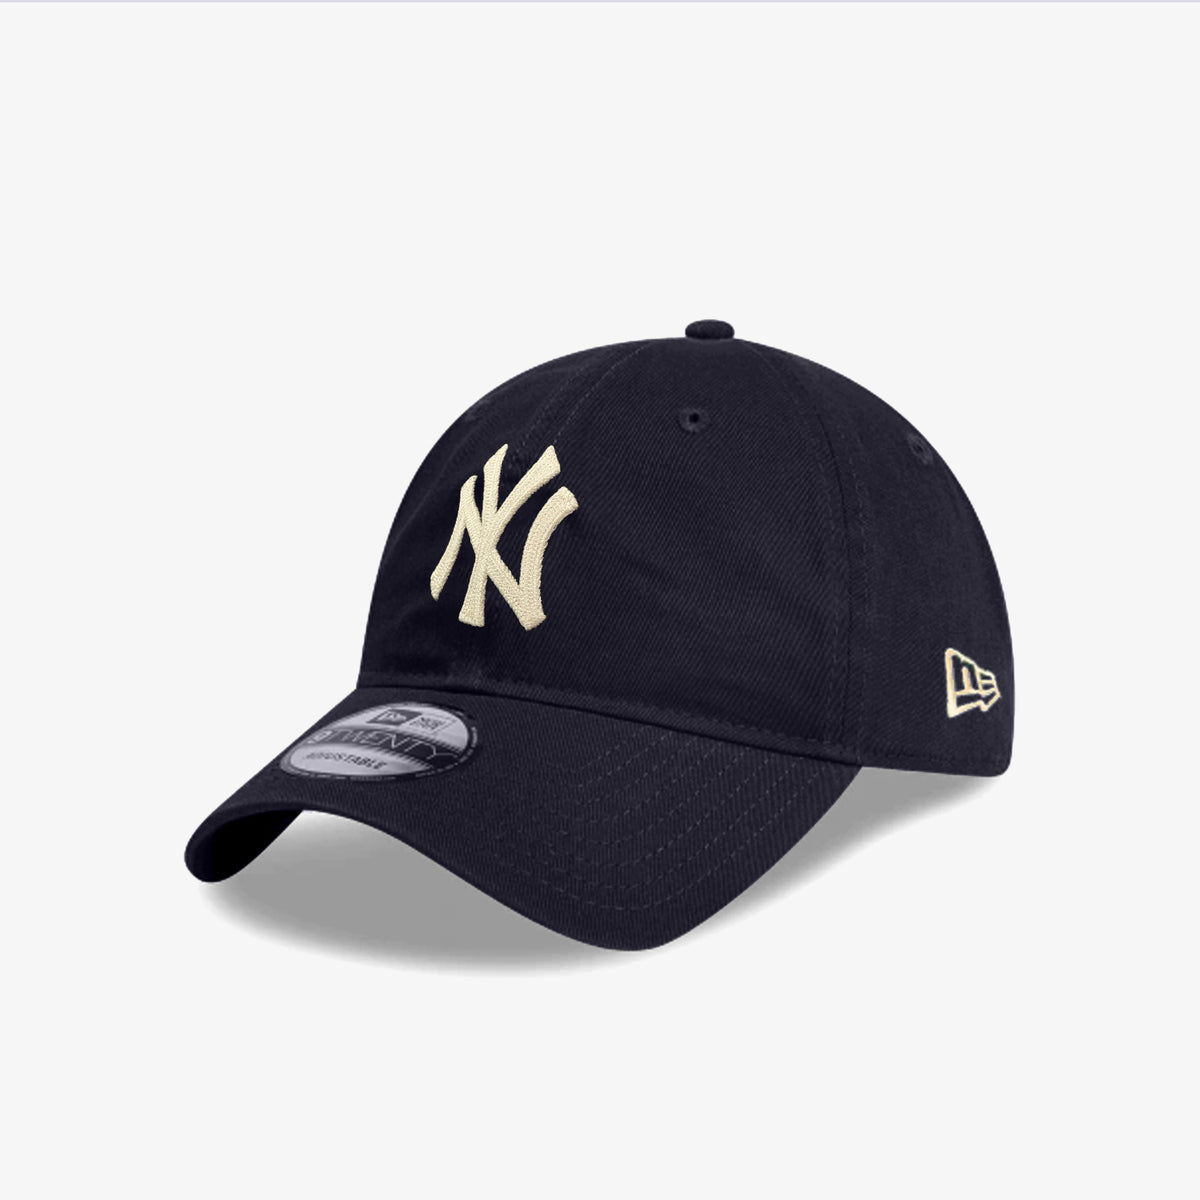 Yankees 9Forty Chain Stitch Snapback - Navy